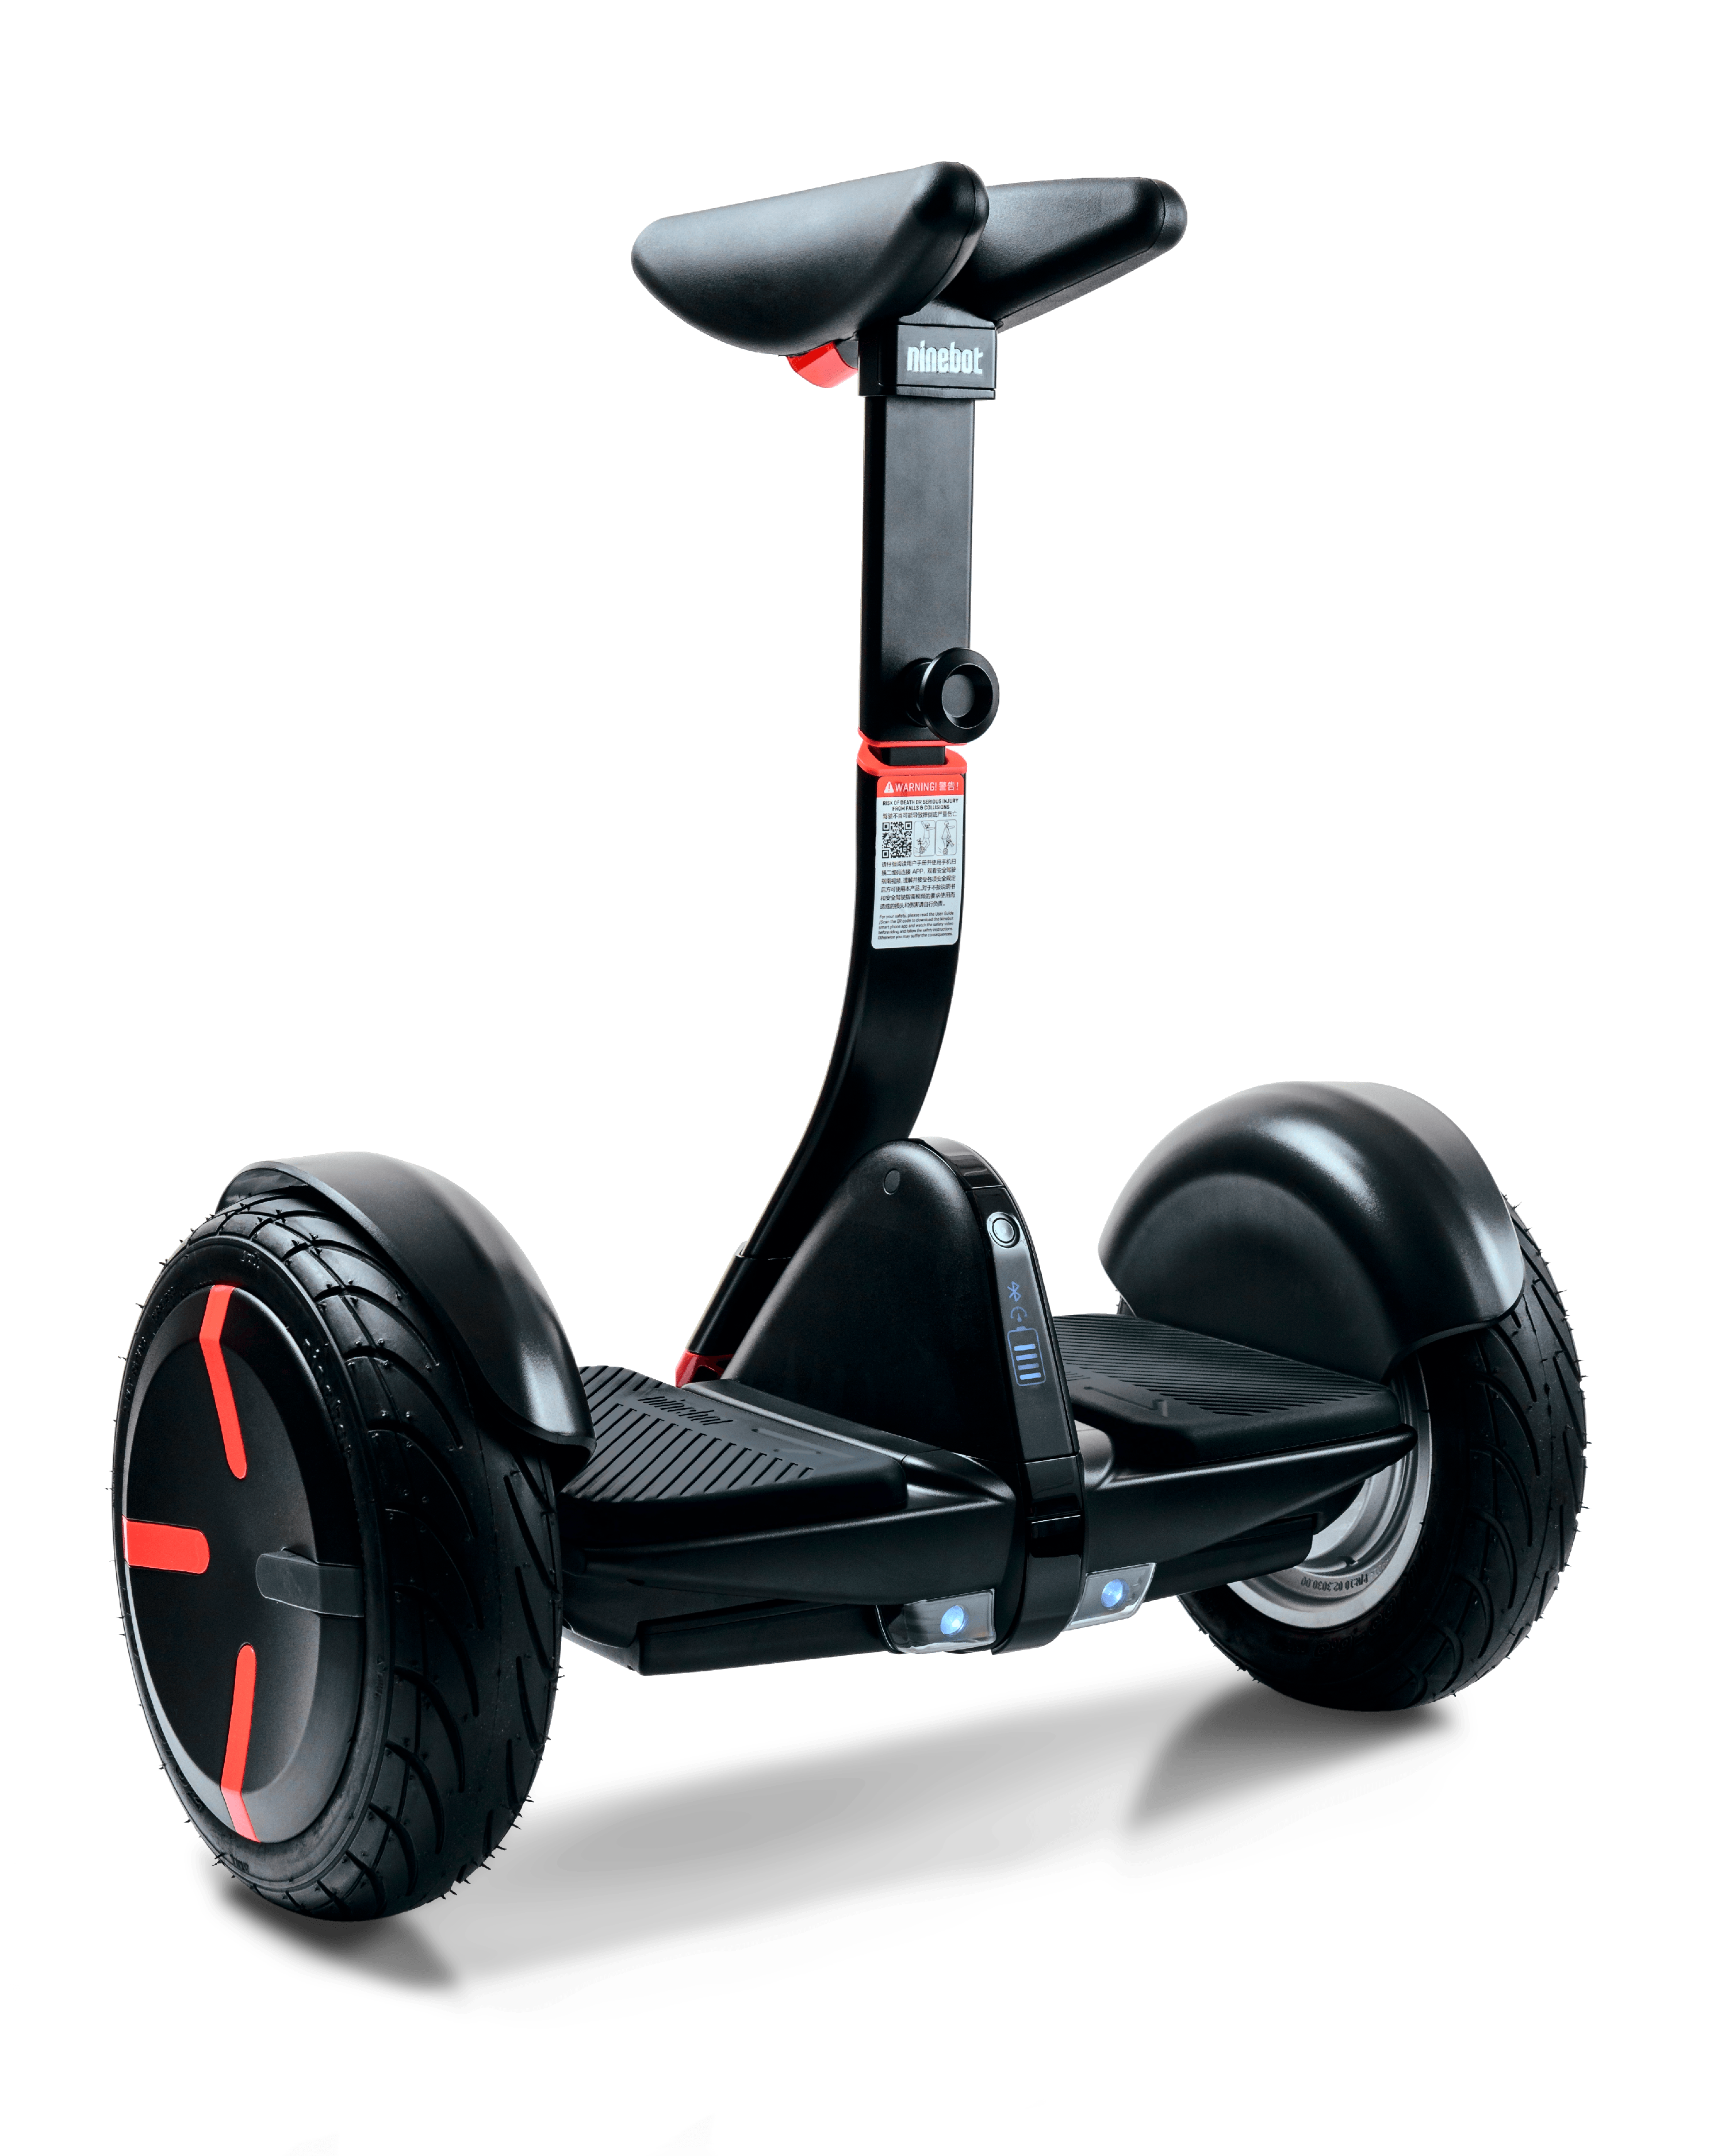 Segway miniPRO Smart Self Balancing Personal Transporter with Mobile App Control 12+ mile range and 260 Watt Hours - image 1 of 4